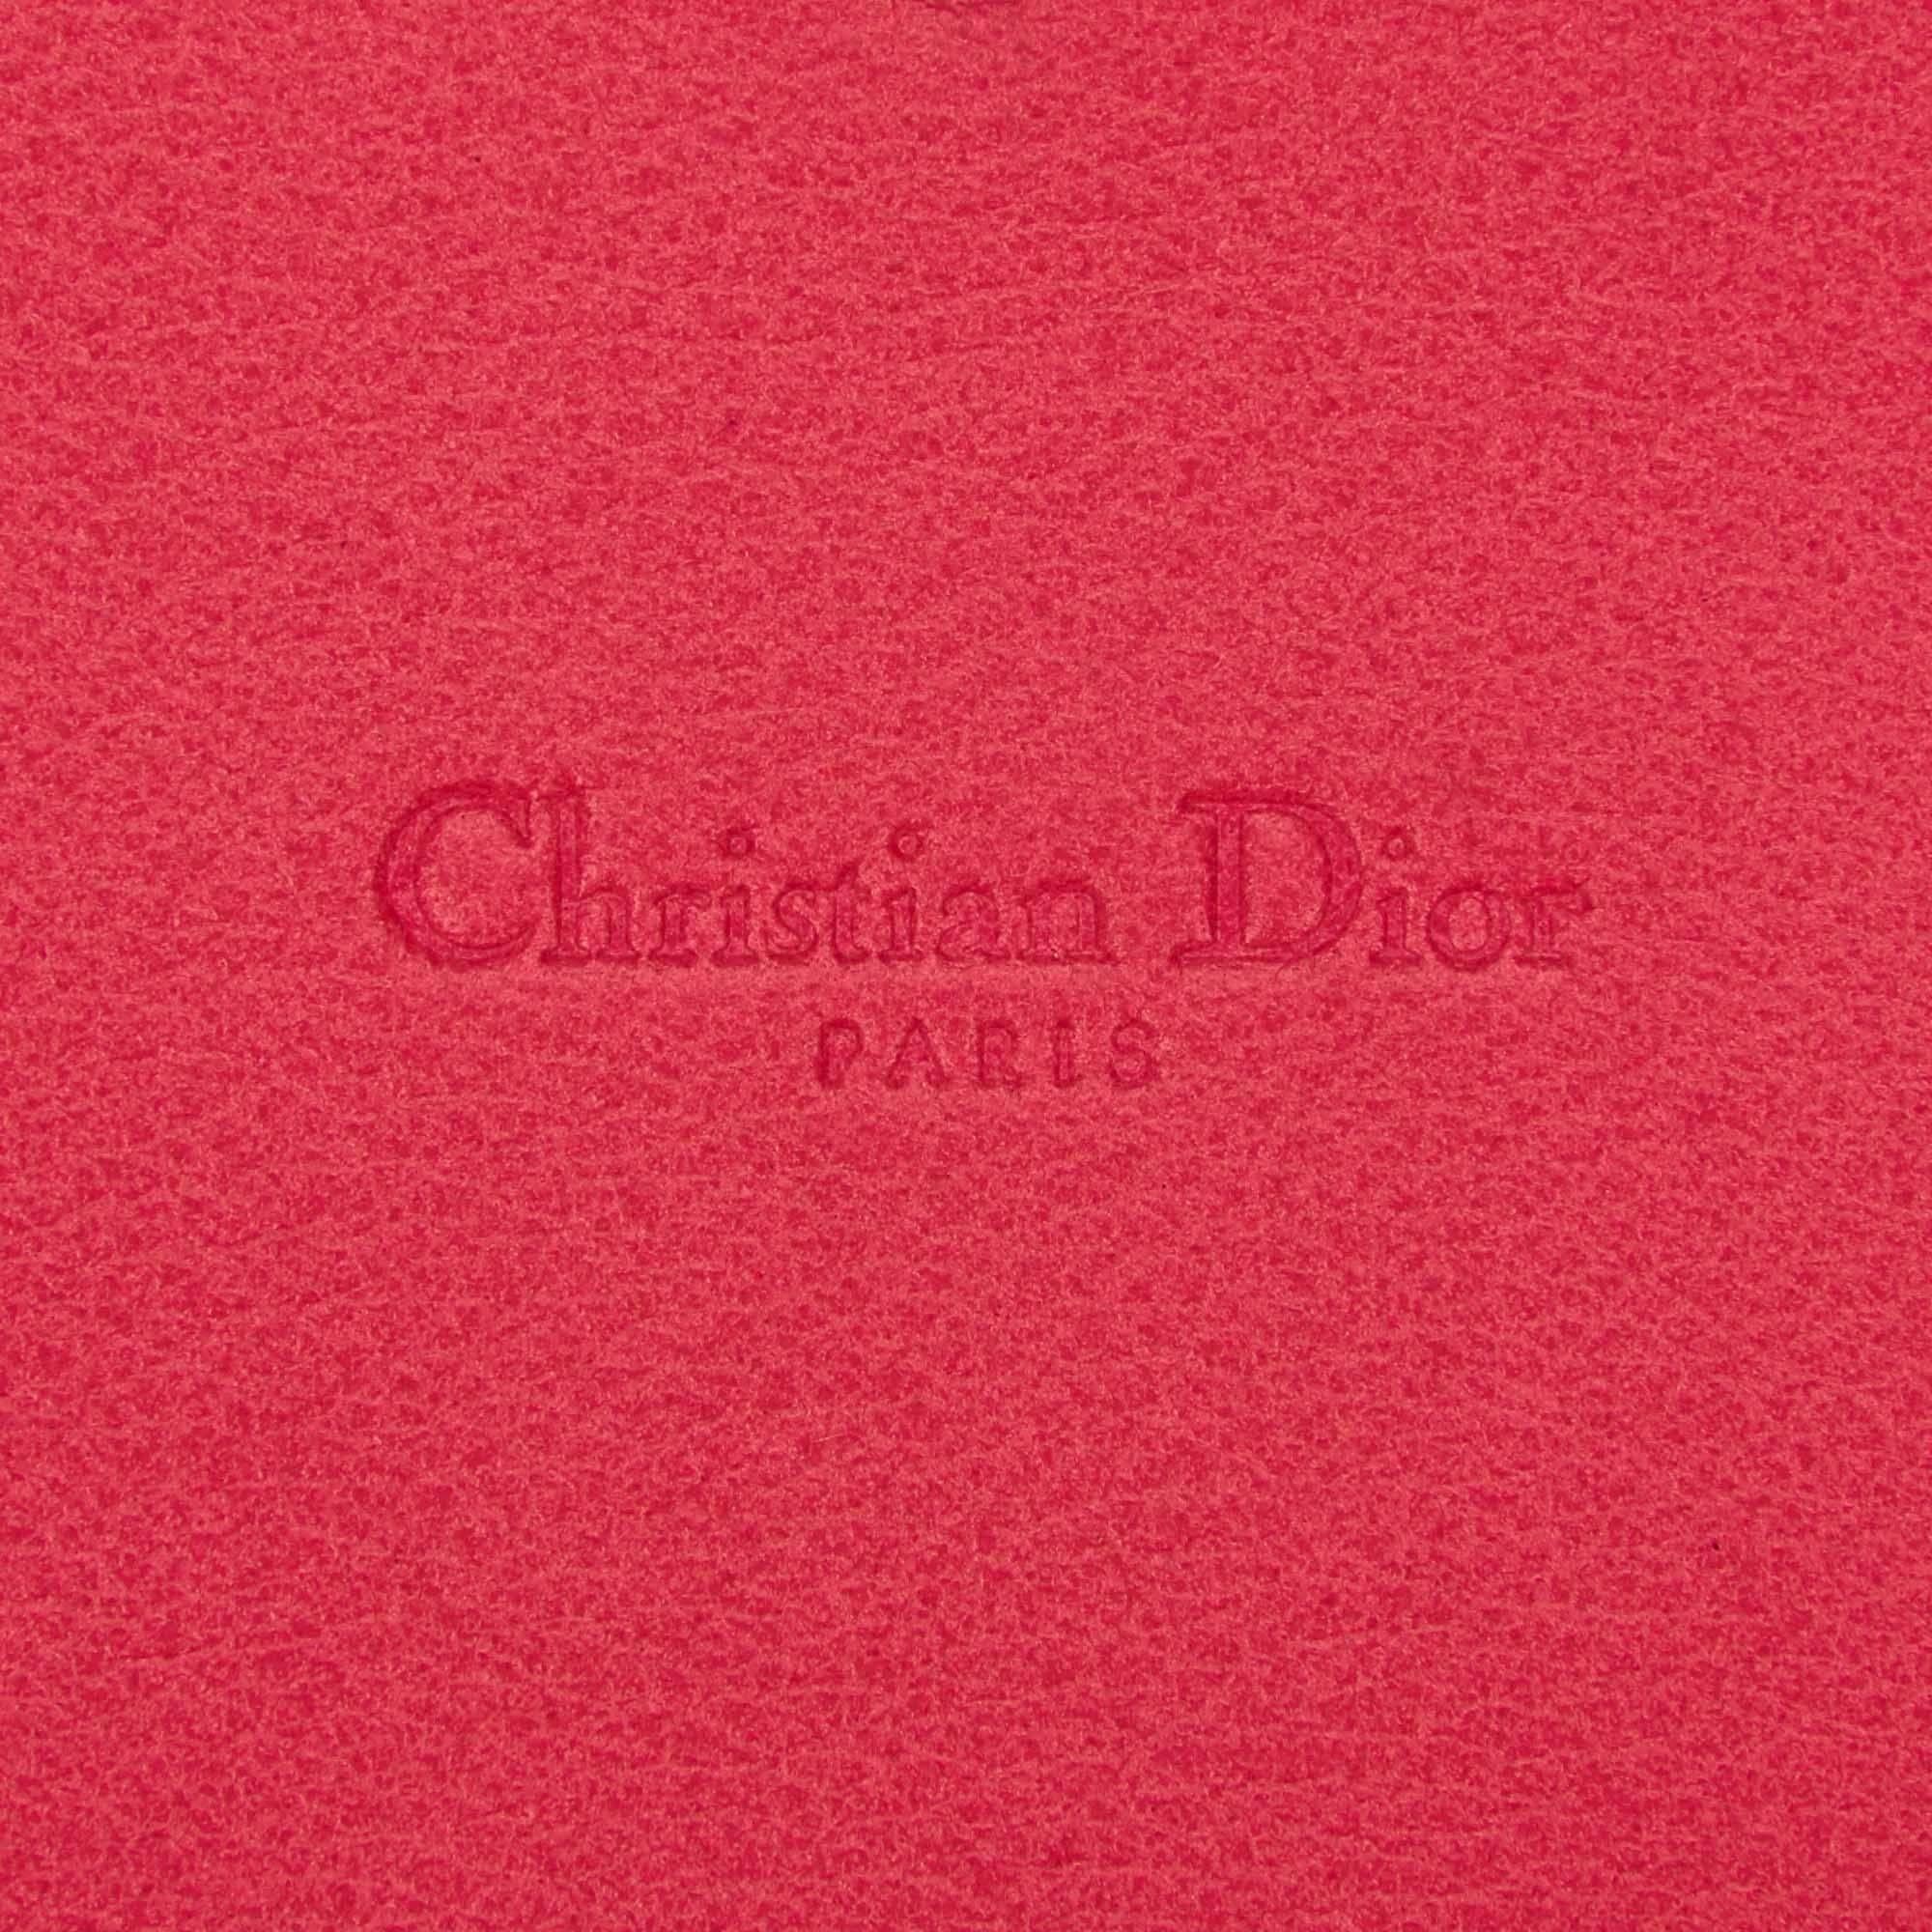 Christian Dior Orange and Pink Leather Clutch Bag  1